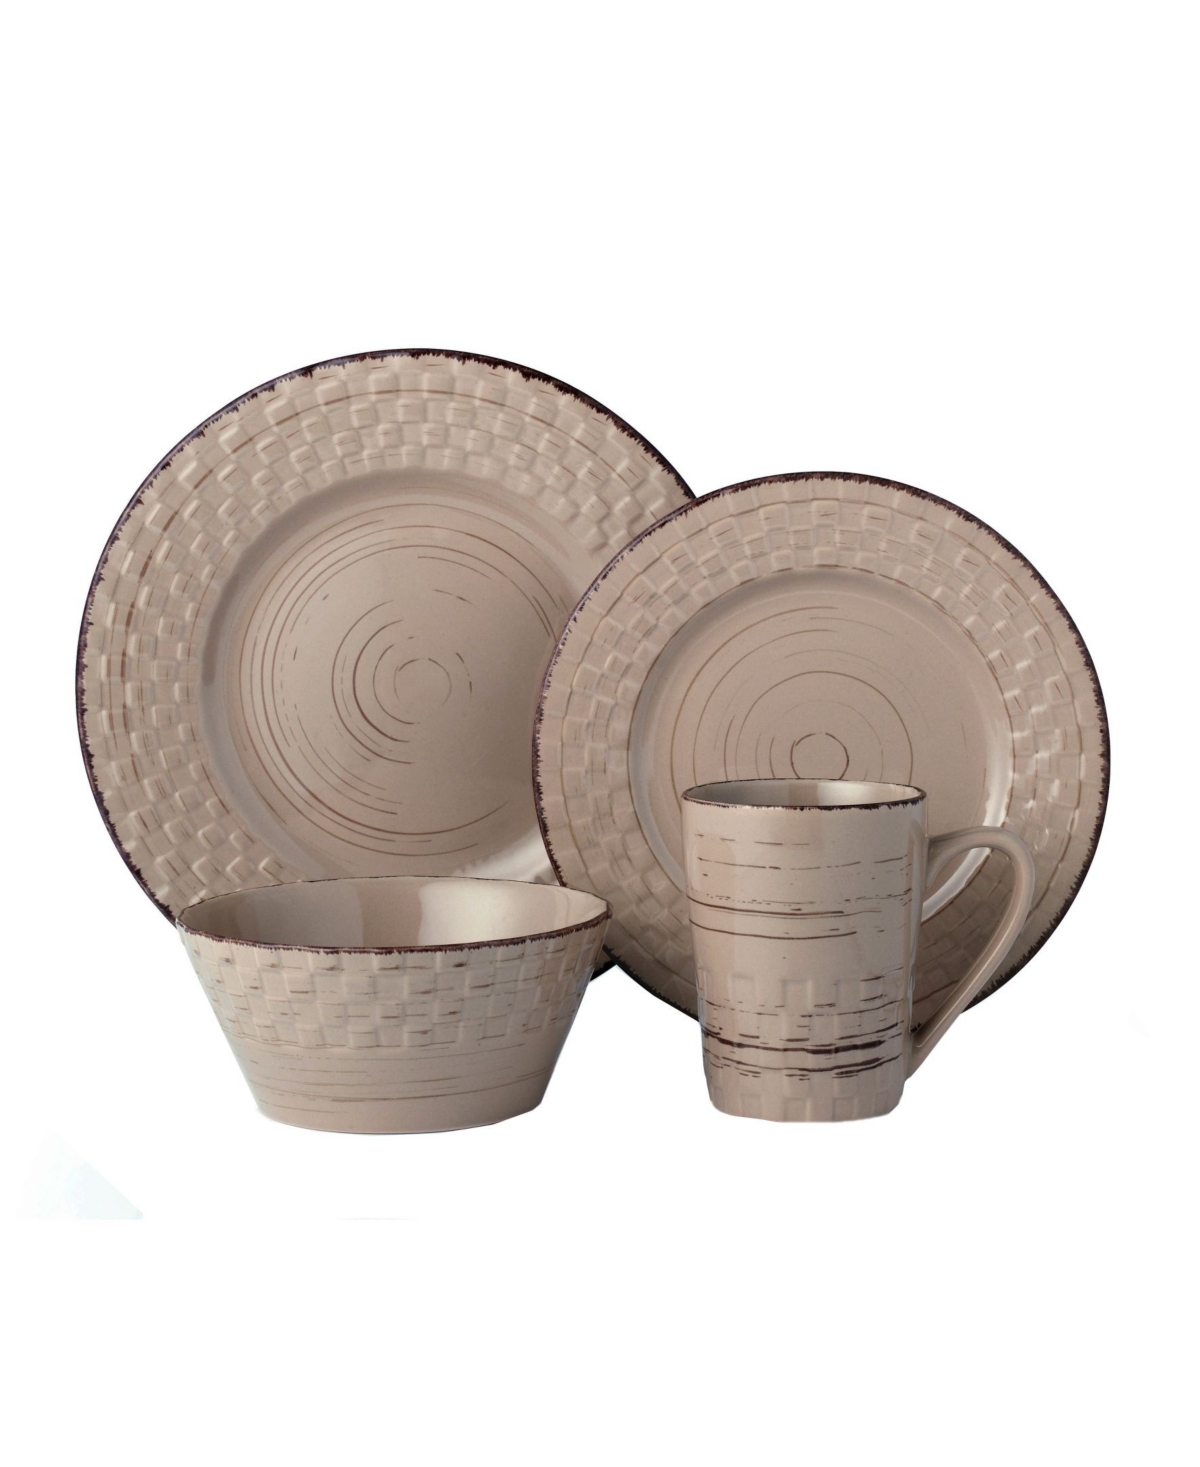 16 Piece Distressed Weave Dinnerware Set, Service for 4 - Brown